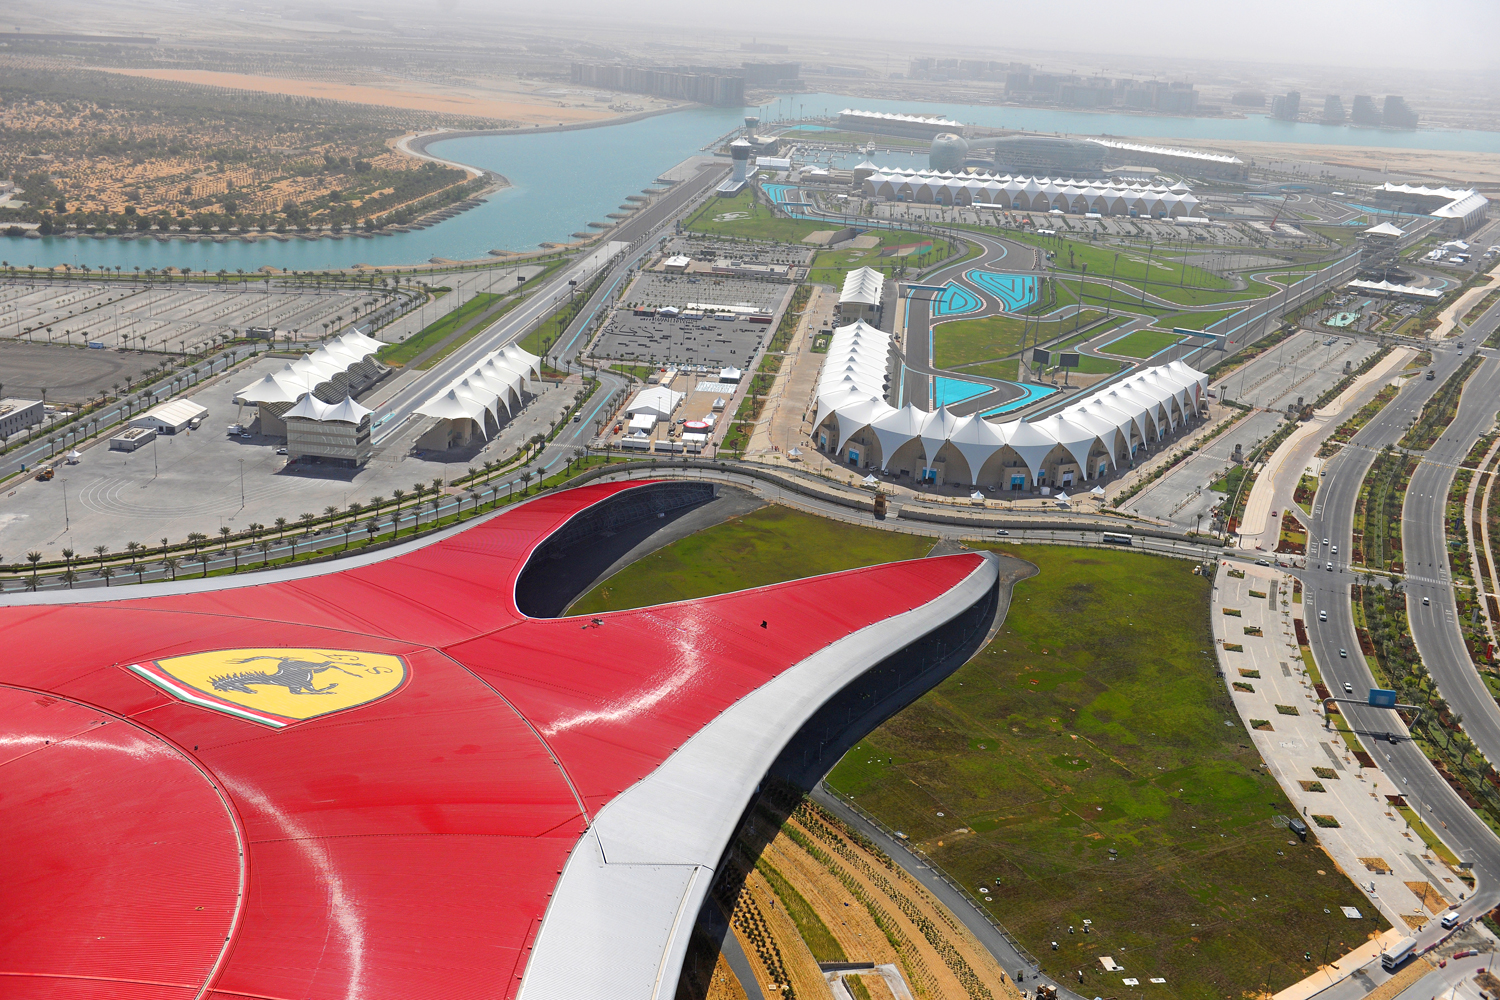 Incredible picture of Ferrari World Abu Dhabi then and now. Time Out Abu Dhabi